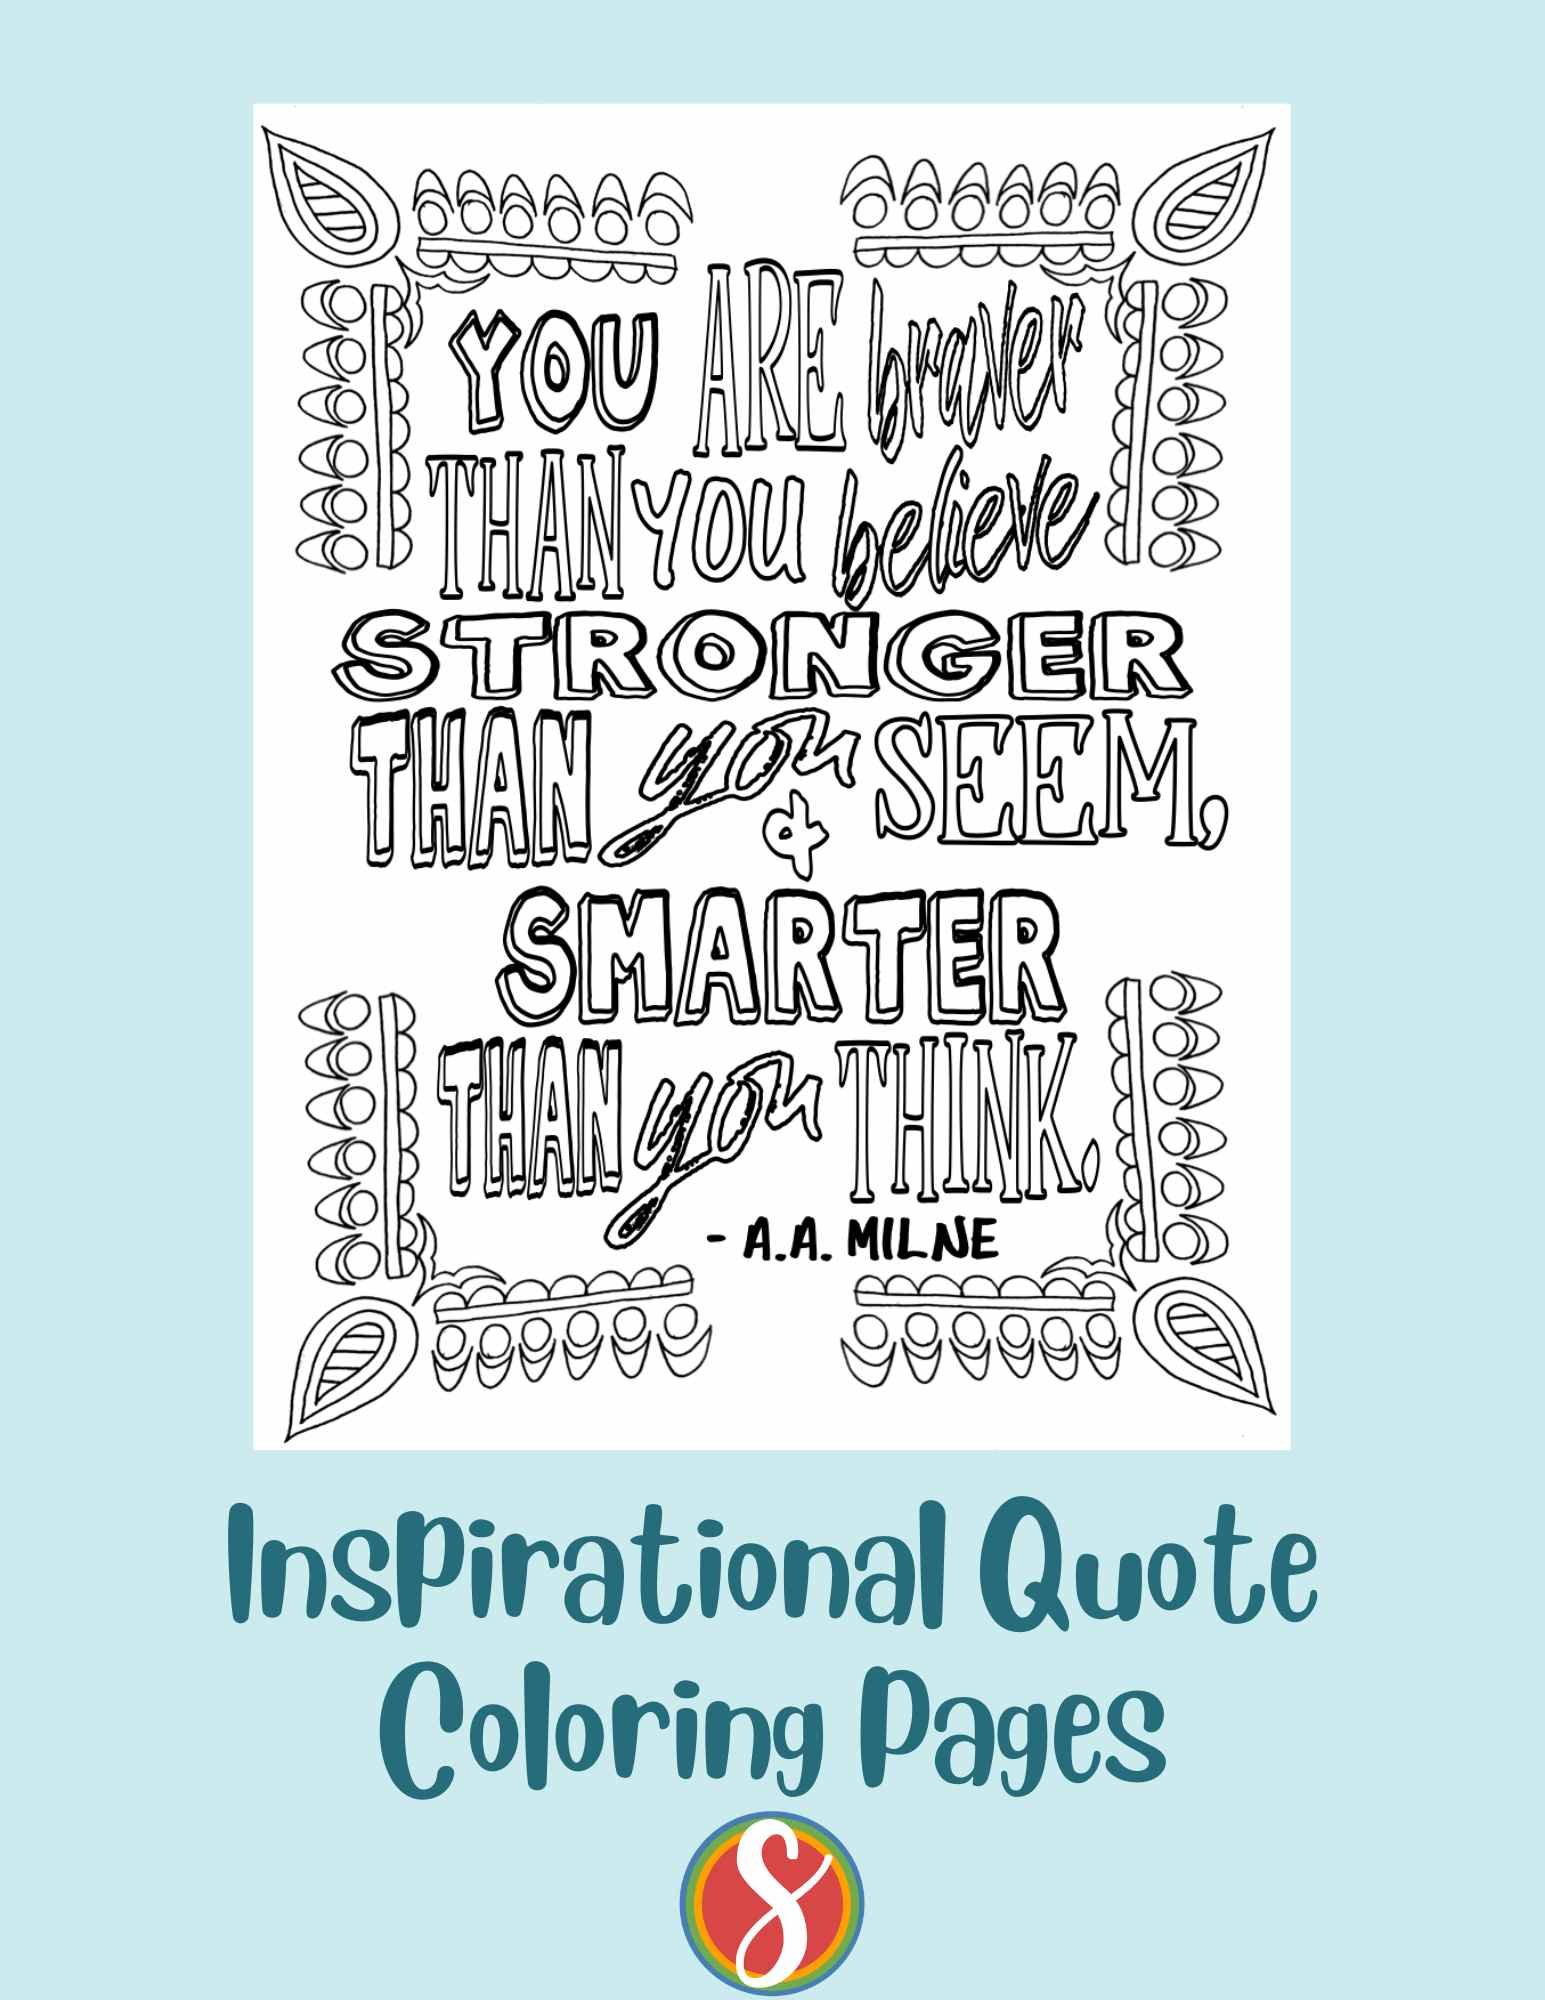 doodles to color at each corner, colorable text in the middle "you are braver than you believe, stronger than you seem, and smarter than you think. - A.A. Milne"